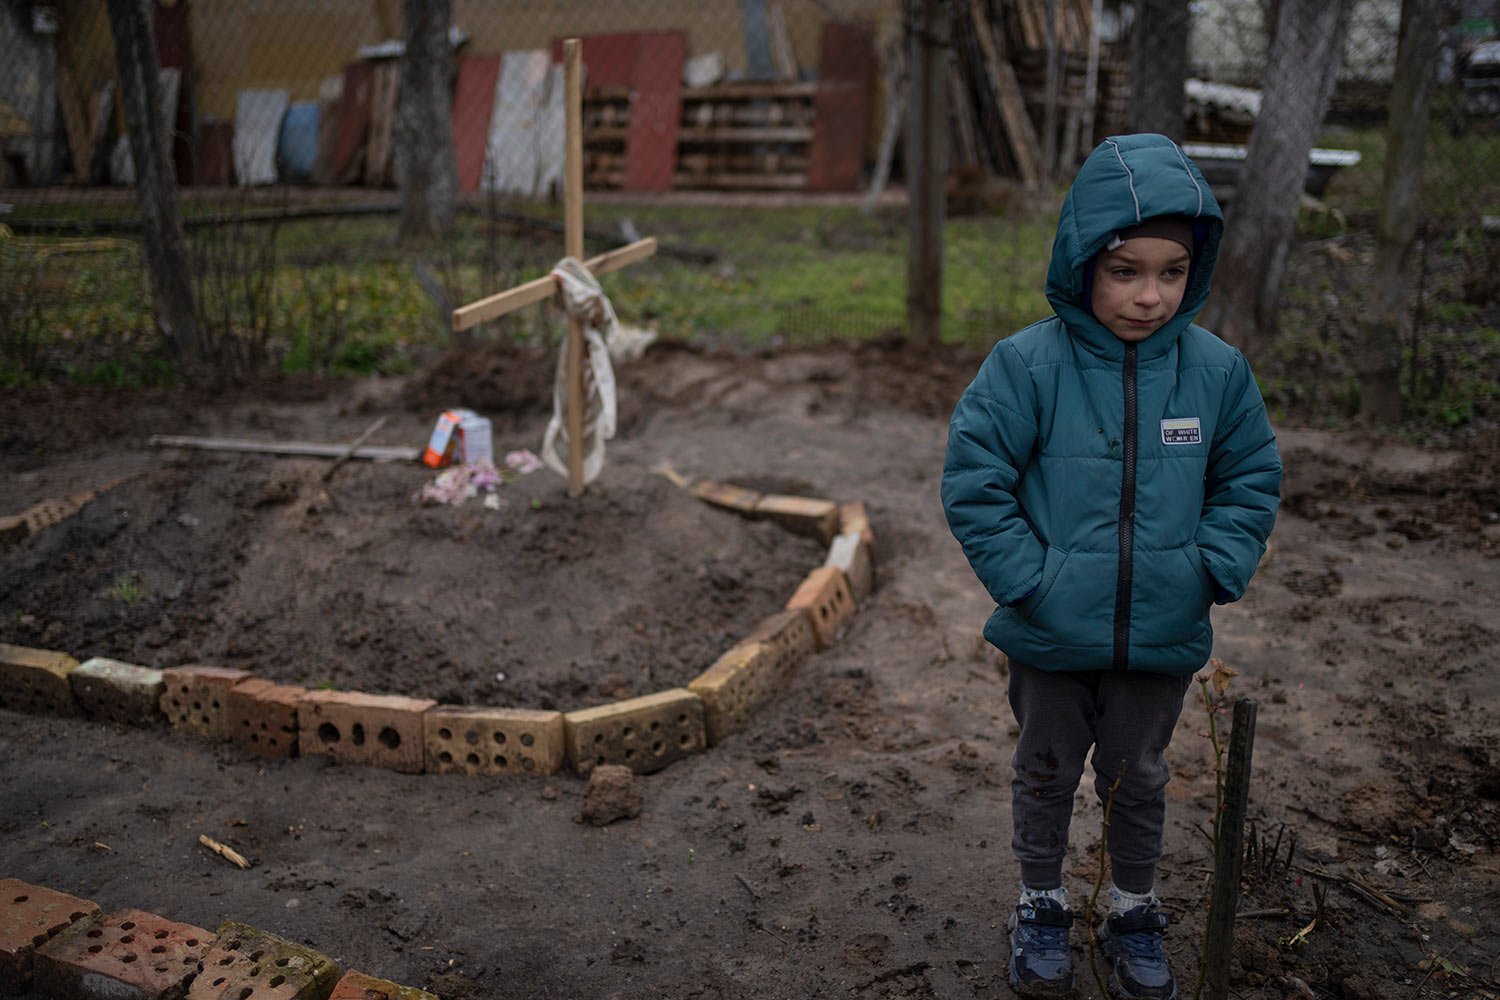  In the courtyard of their house, Vlad Tanyuk, 6, stands near the grave of his mother Ira Tanyuk, who died because of starvation and stress due to the war, on the outskirts of Kyiv, Ukraine, Monday, April 4, 2022. (AP Photo/Rodrigo Abd) 